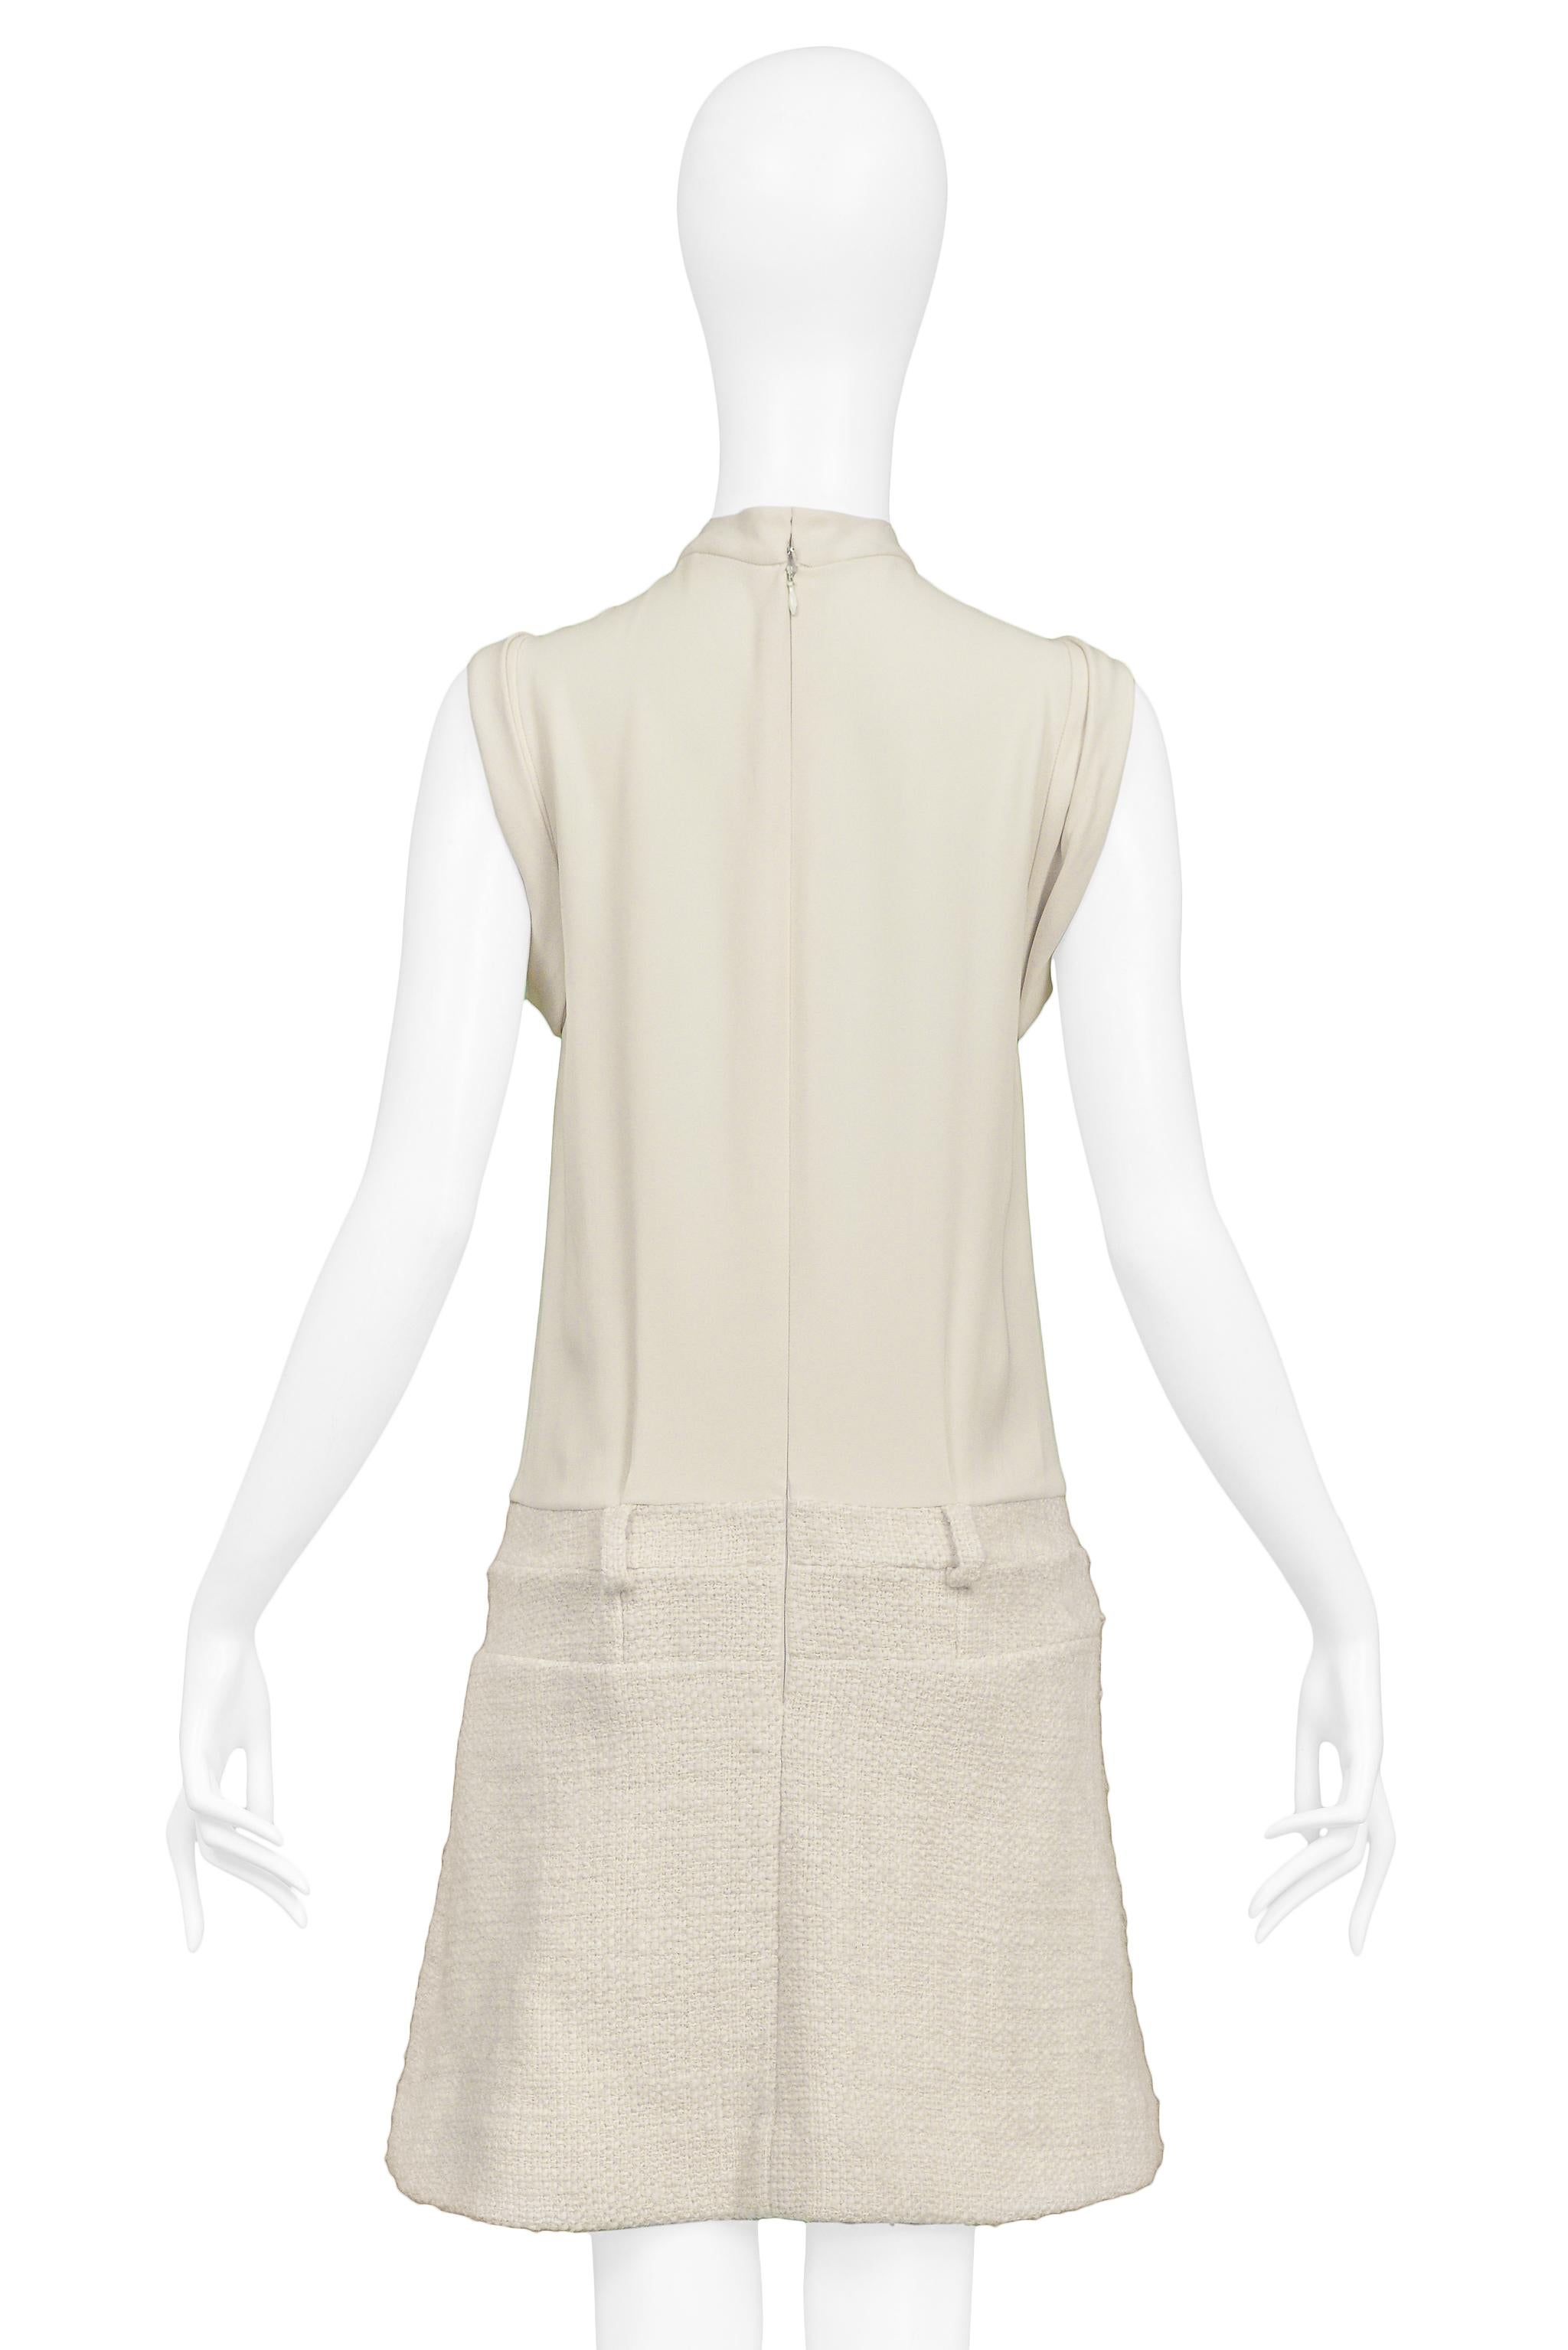 Balenciaga By Ghesquiere Off-White Box Pleat Dress 2006 For Sale 3